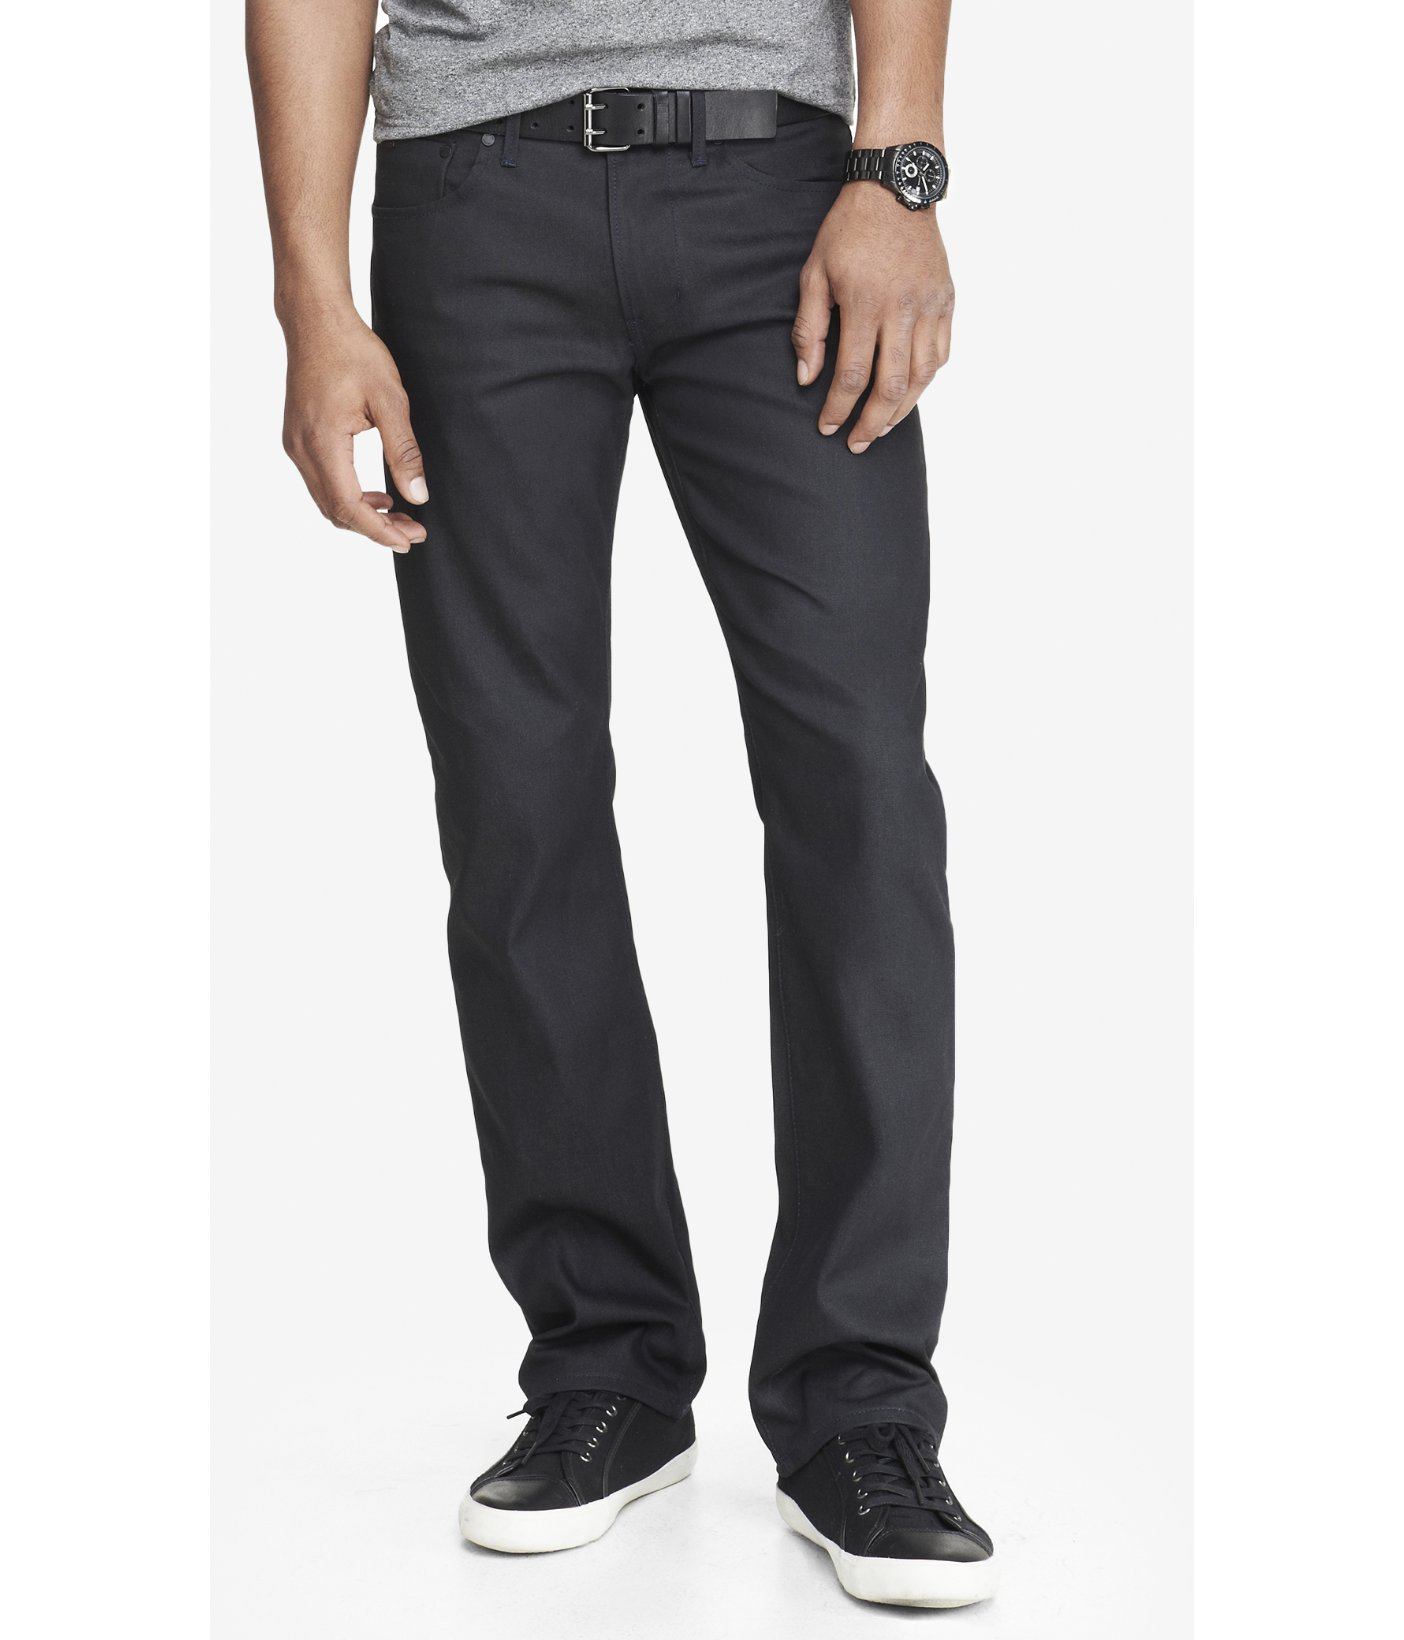 Men's Express Jeans - Rocco Slim Fit Straight 26B